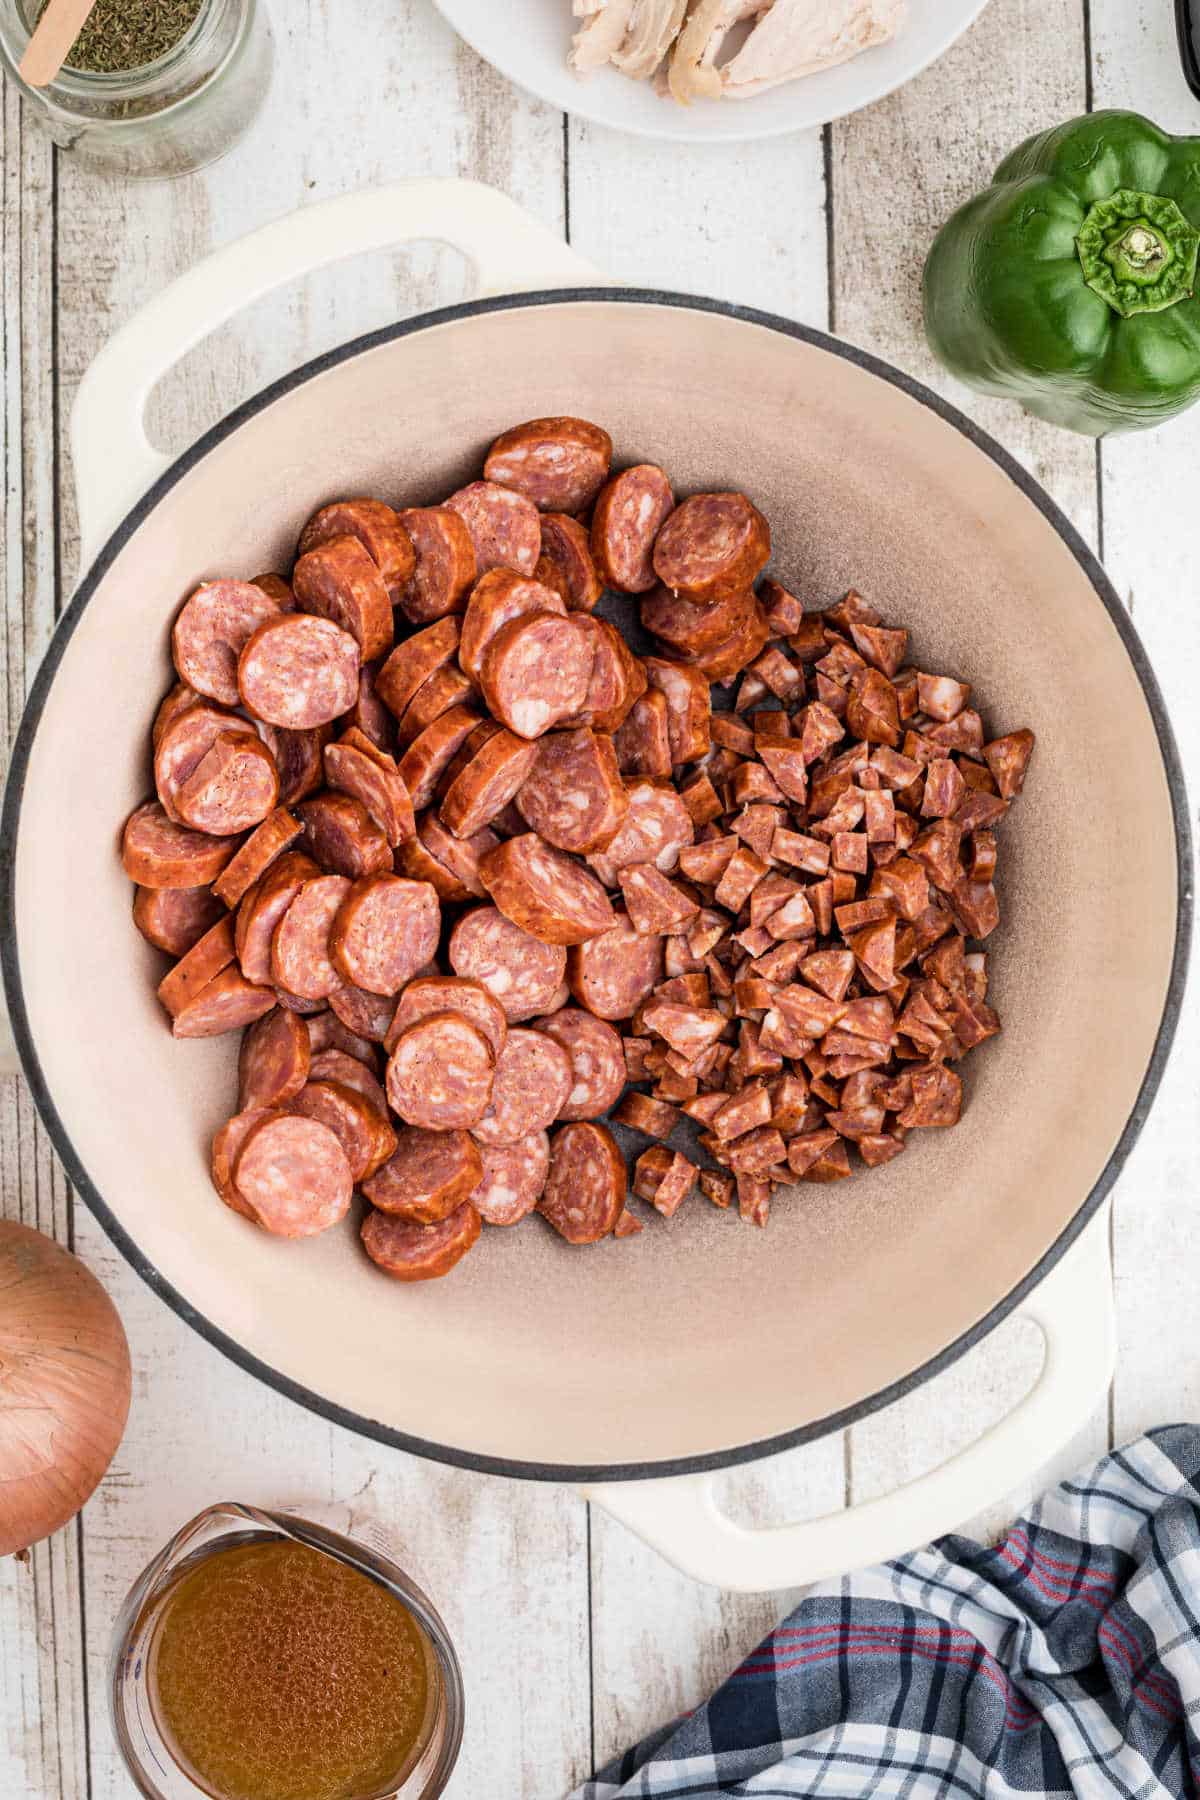 Chopped up smoked sausages in a Dutch Oven.